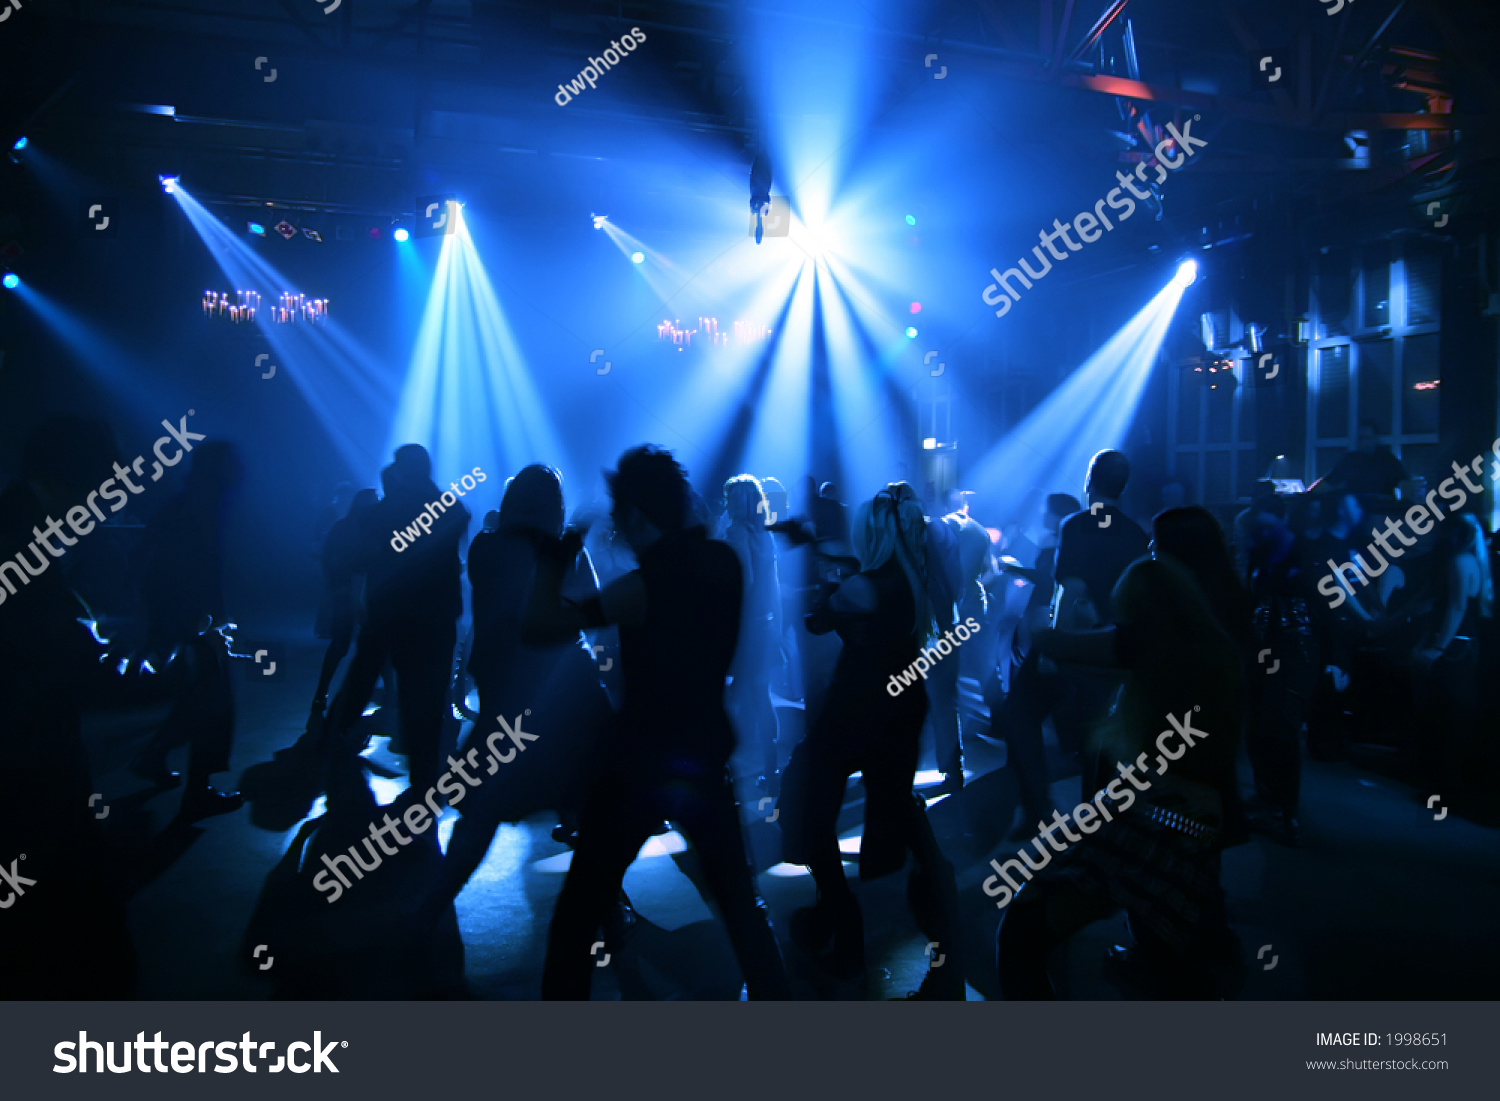 People Dancing In A Disco Stock Photo 1998651 : Shutterstock